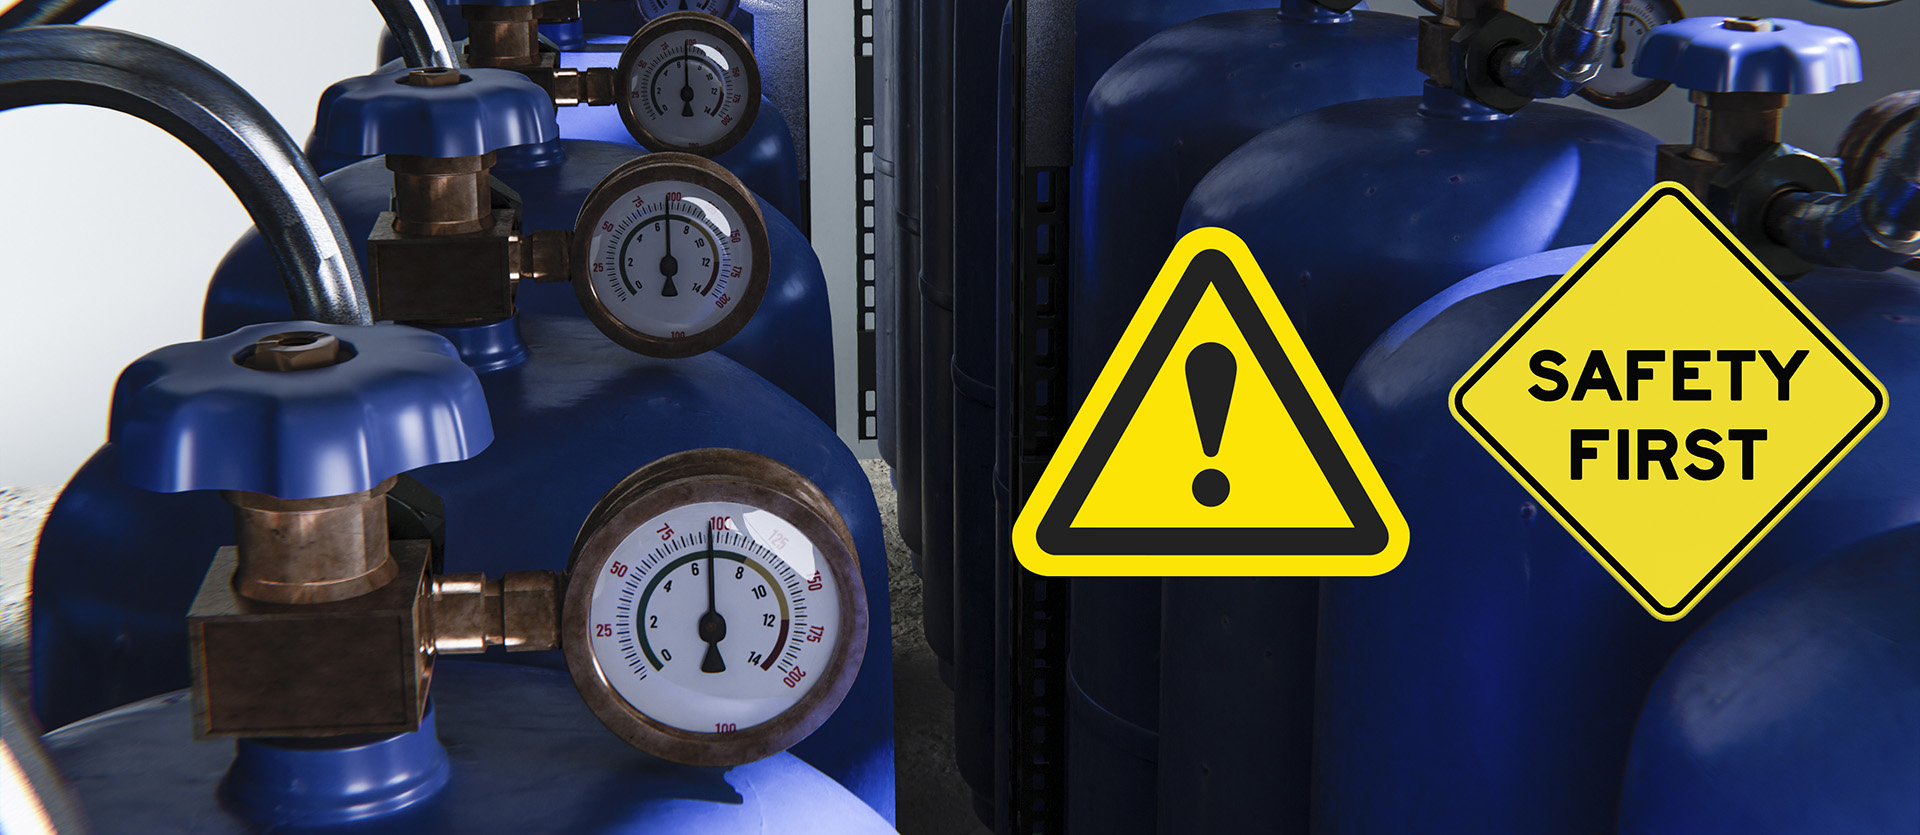 Safety Precautions and Operating Rules in Compressors